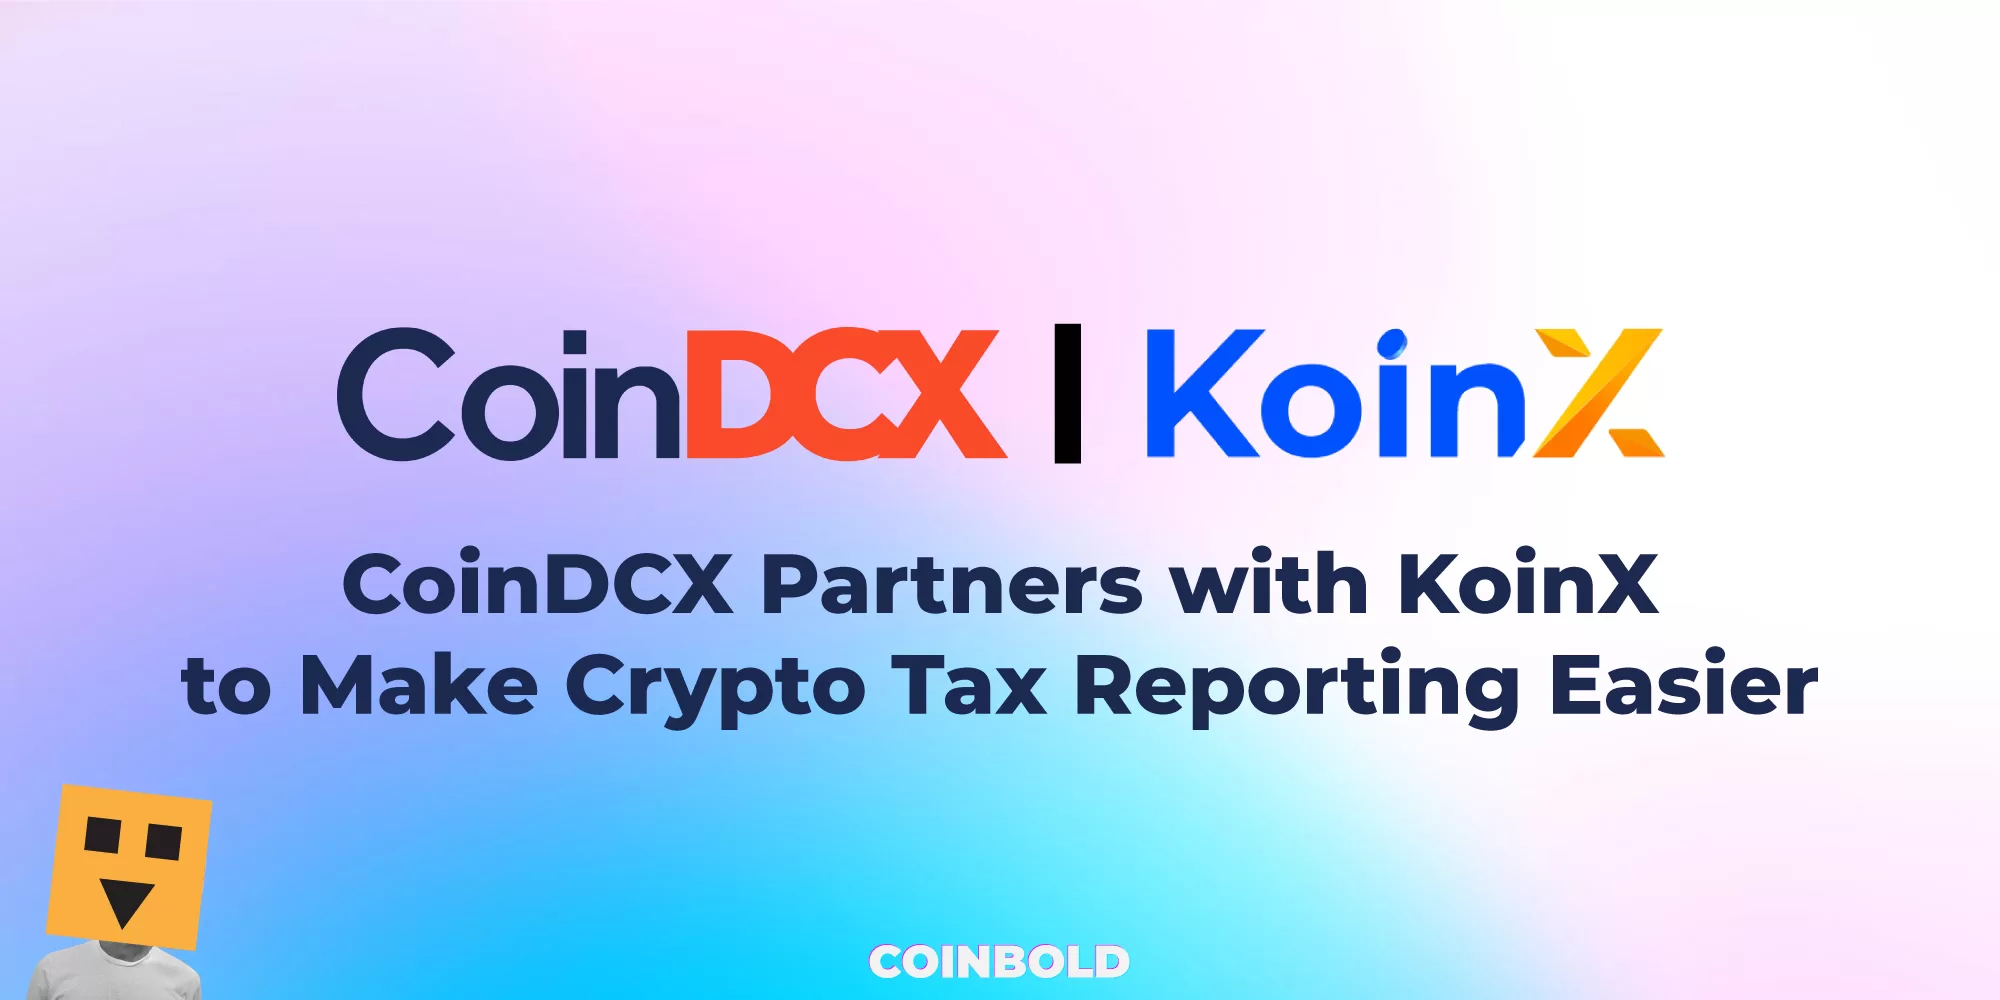 CoinDCX Partners with KoinX to Make Crypto Tax Reporting Easier